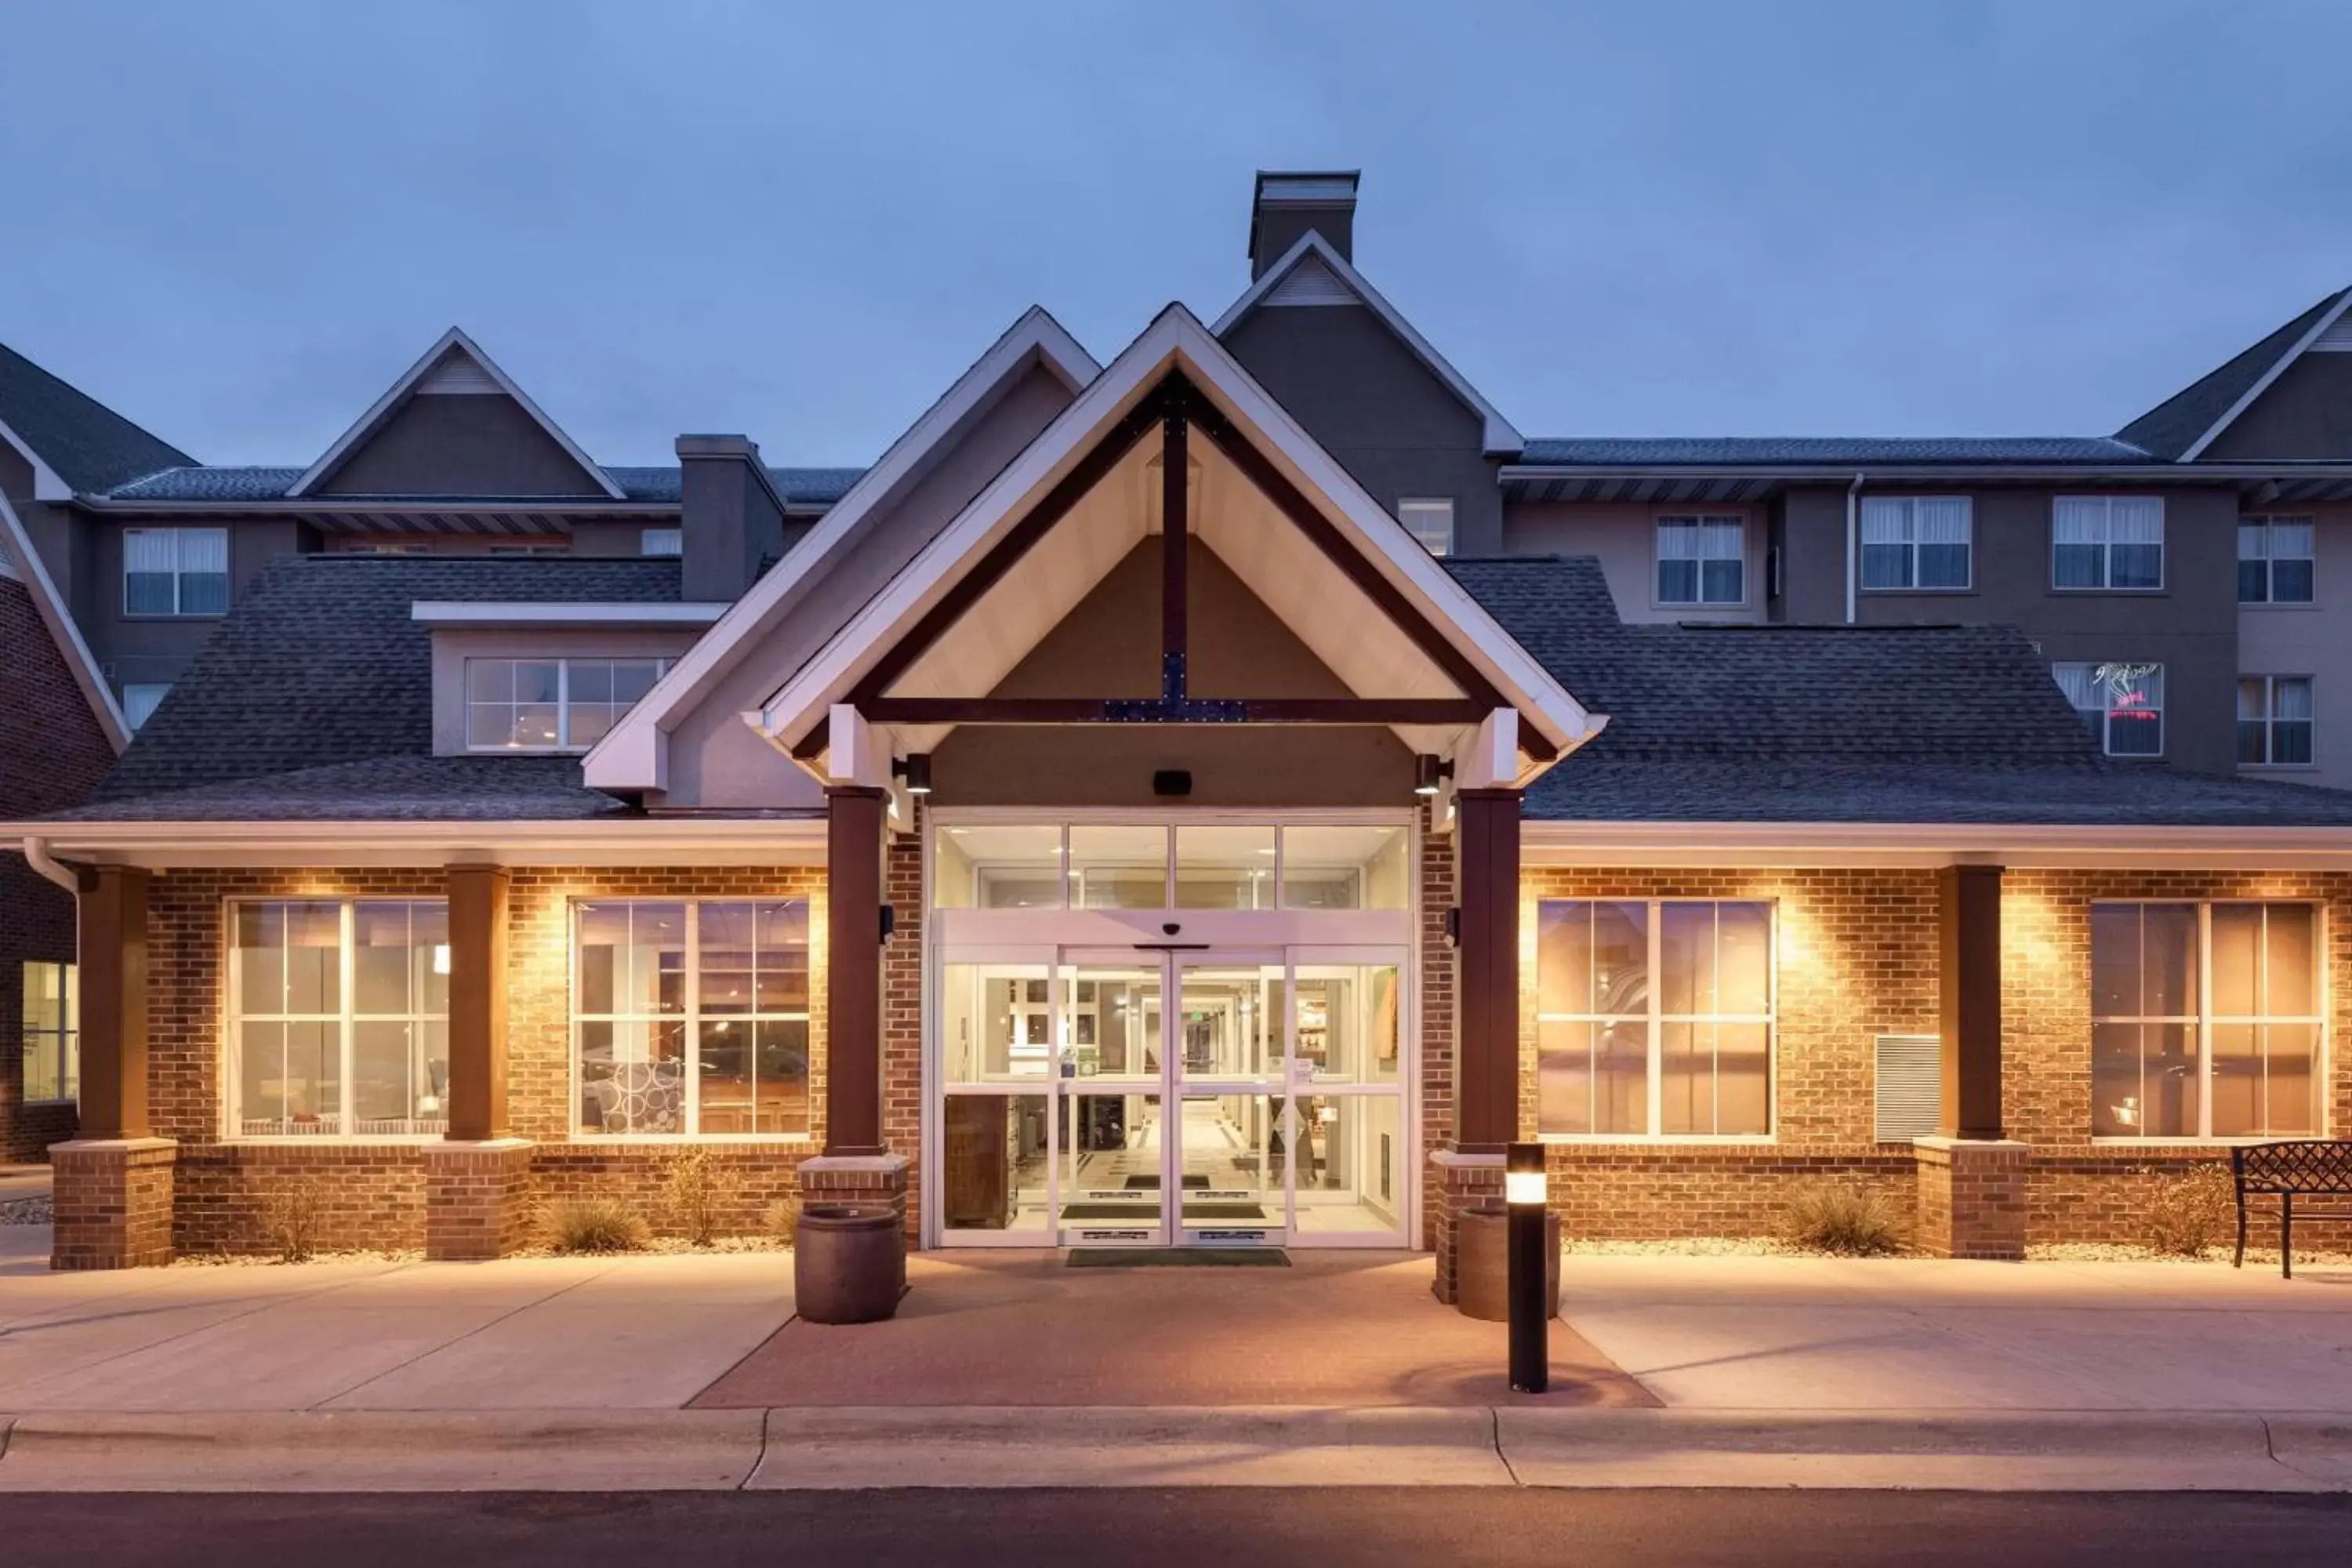 Property Building in Residence Inn South Bend Mishawaka